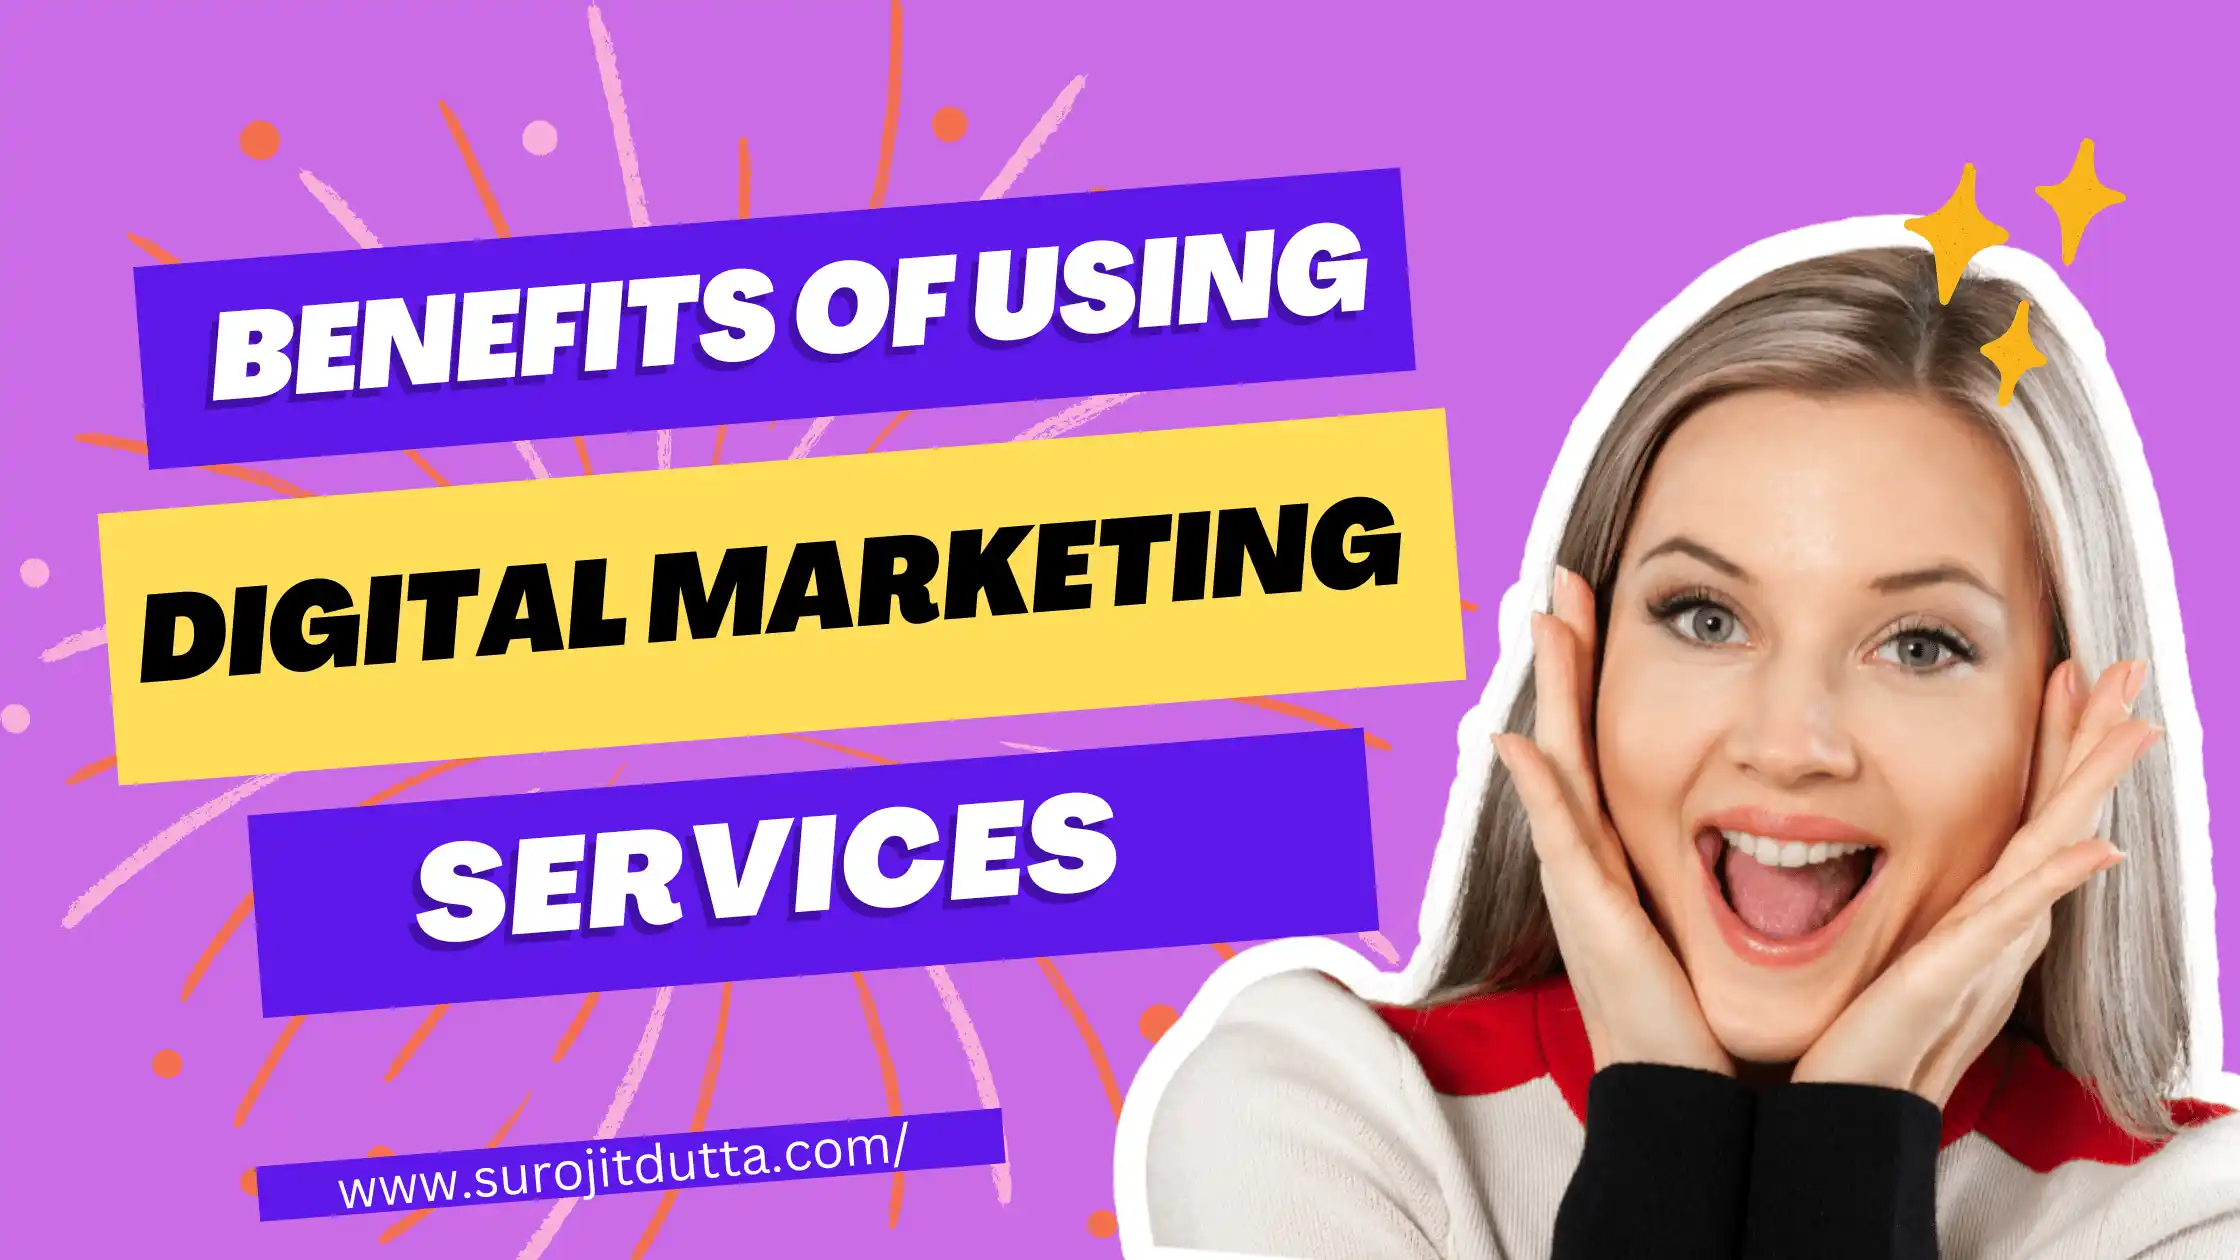 Benefits of Using Digital Marketing Services